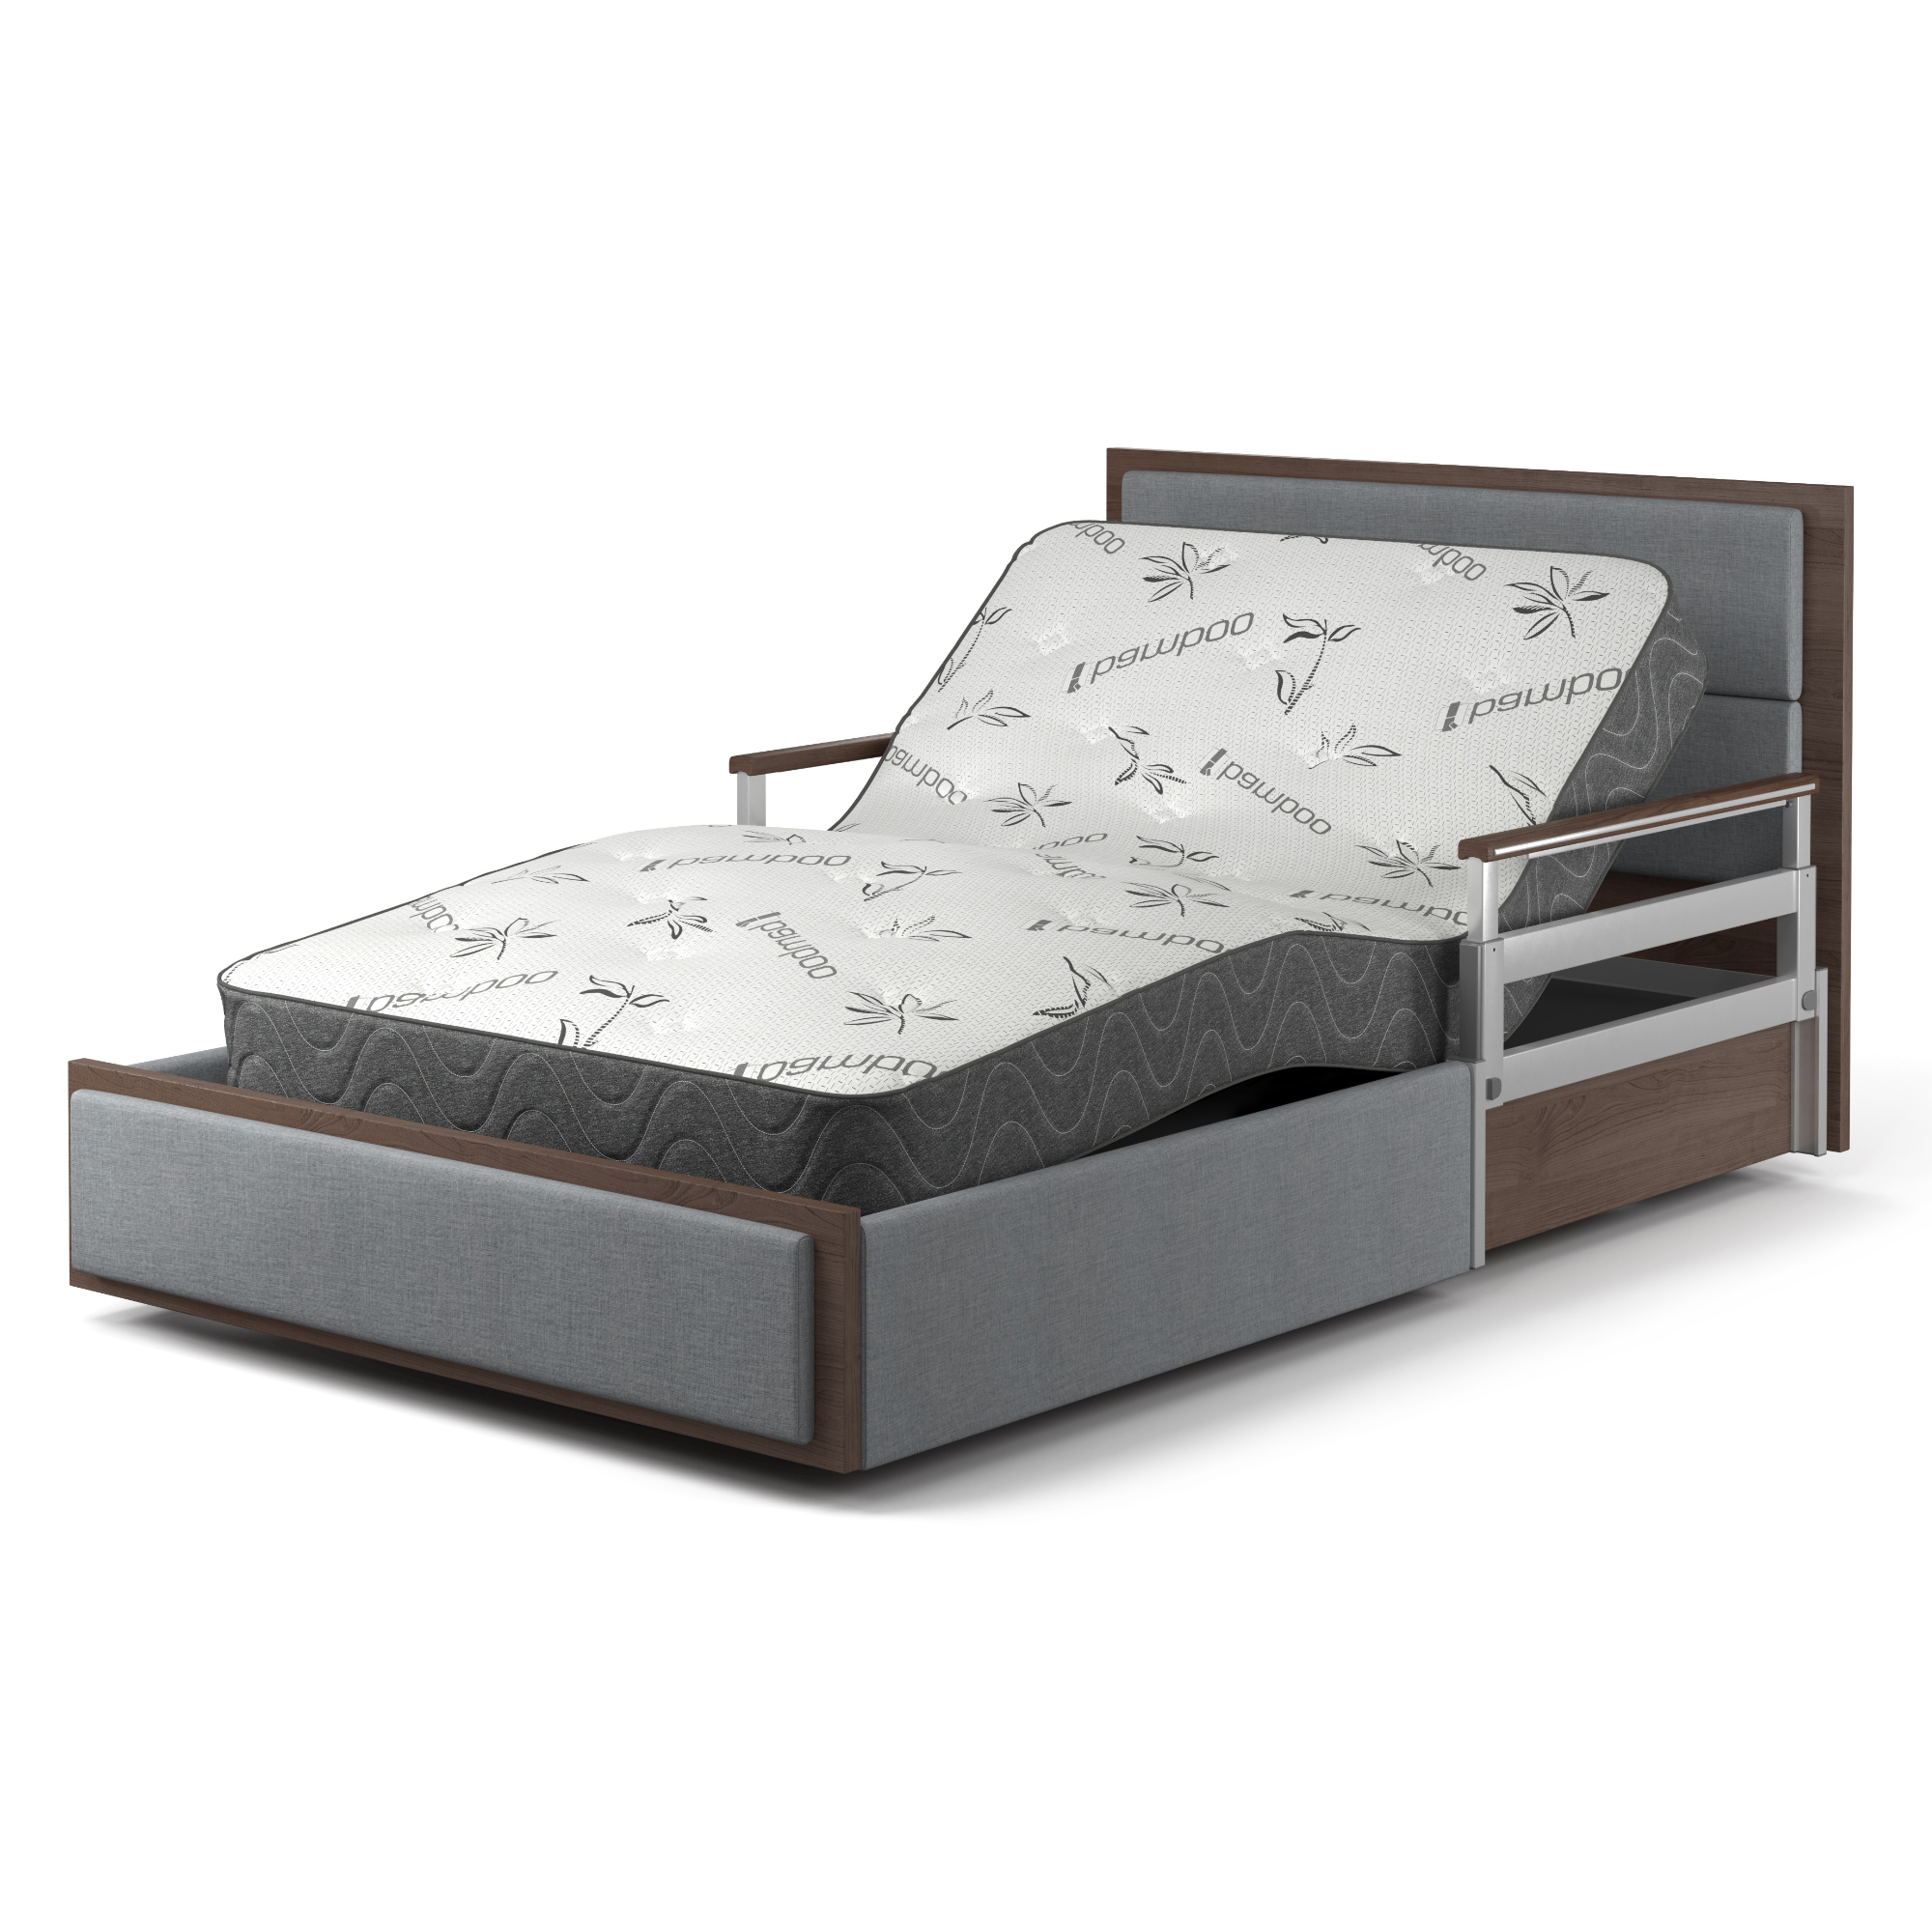 A SonderCare Aura™ Platinum Hospital Bed with a mattress on top.